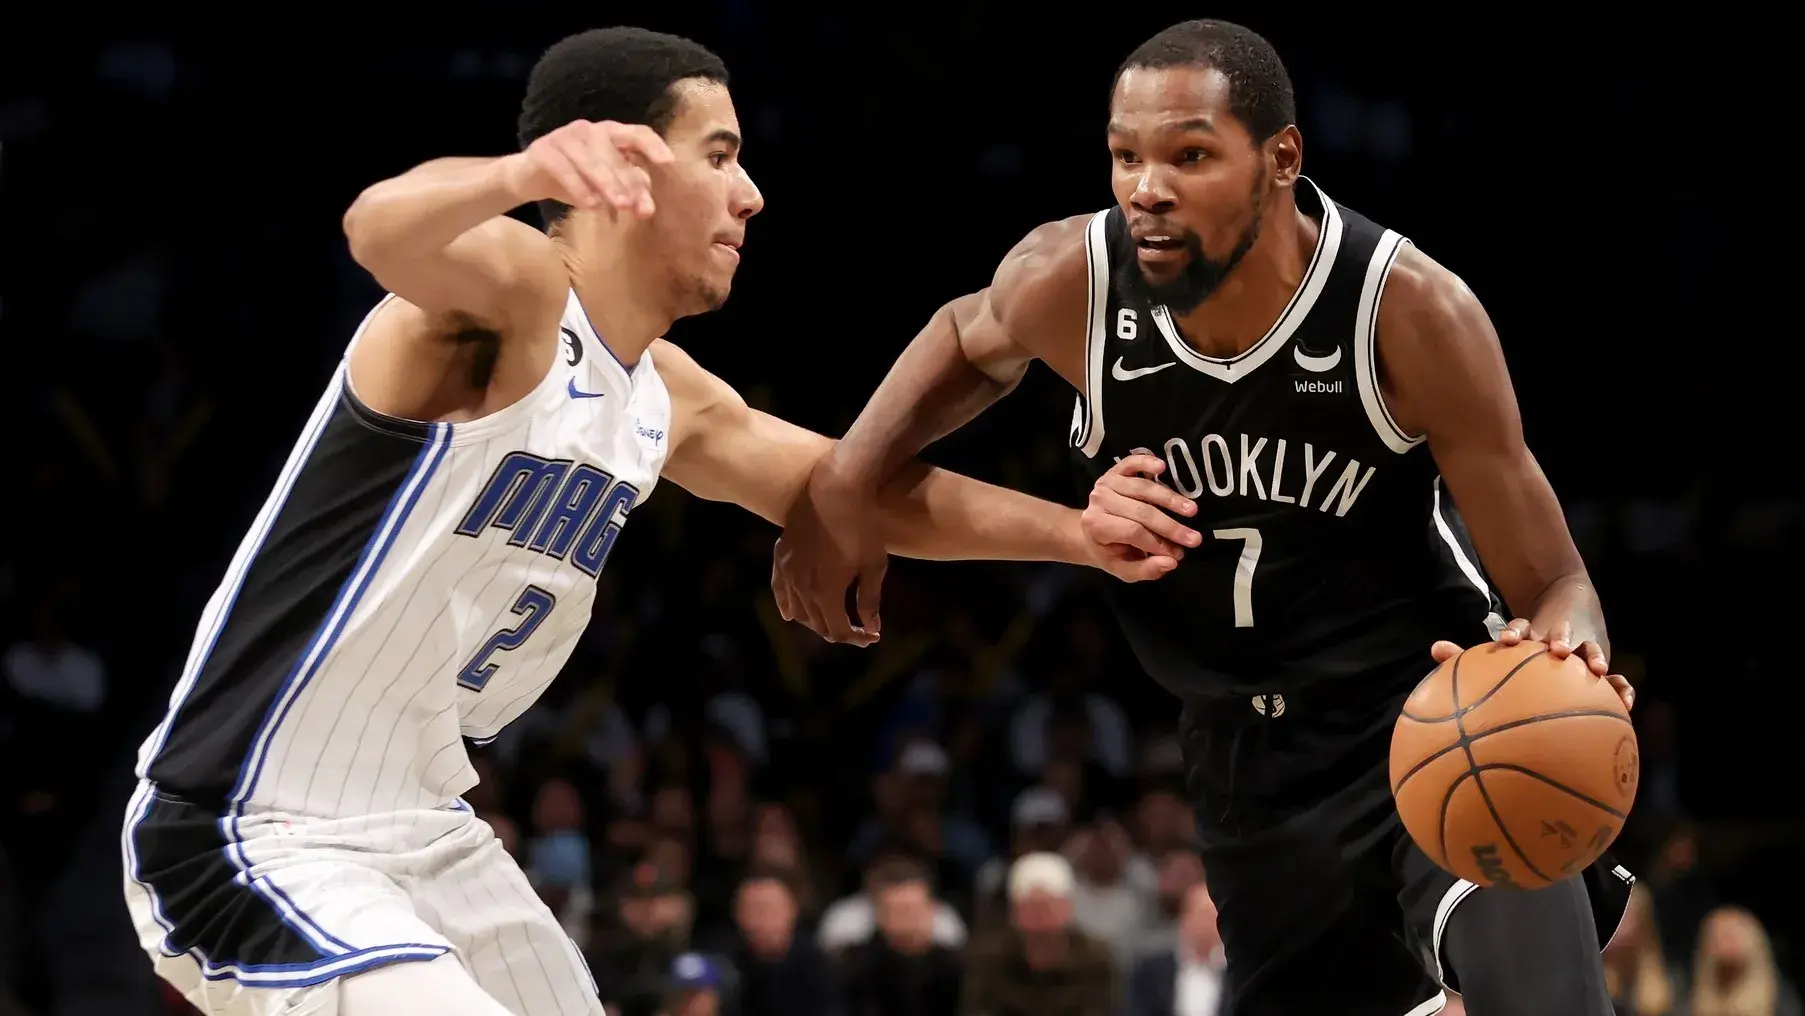 Nov 28, 2022; Brooklyn, New York, USA; Brooklyn Nets forward Kevin Durant (7) drives to the basket against Orlando Magic forward Caleb Houstan (2) during the fourth quarter at Barclays Center. / Brad Penner-USA TODAY Sports